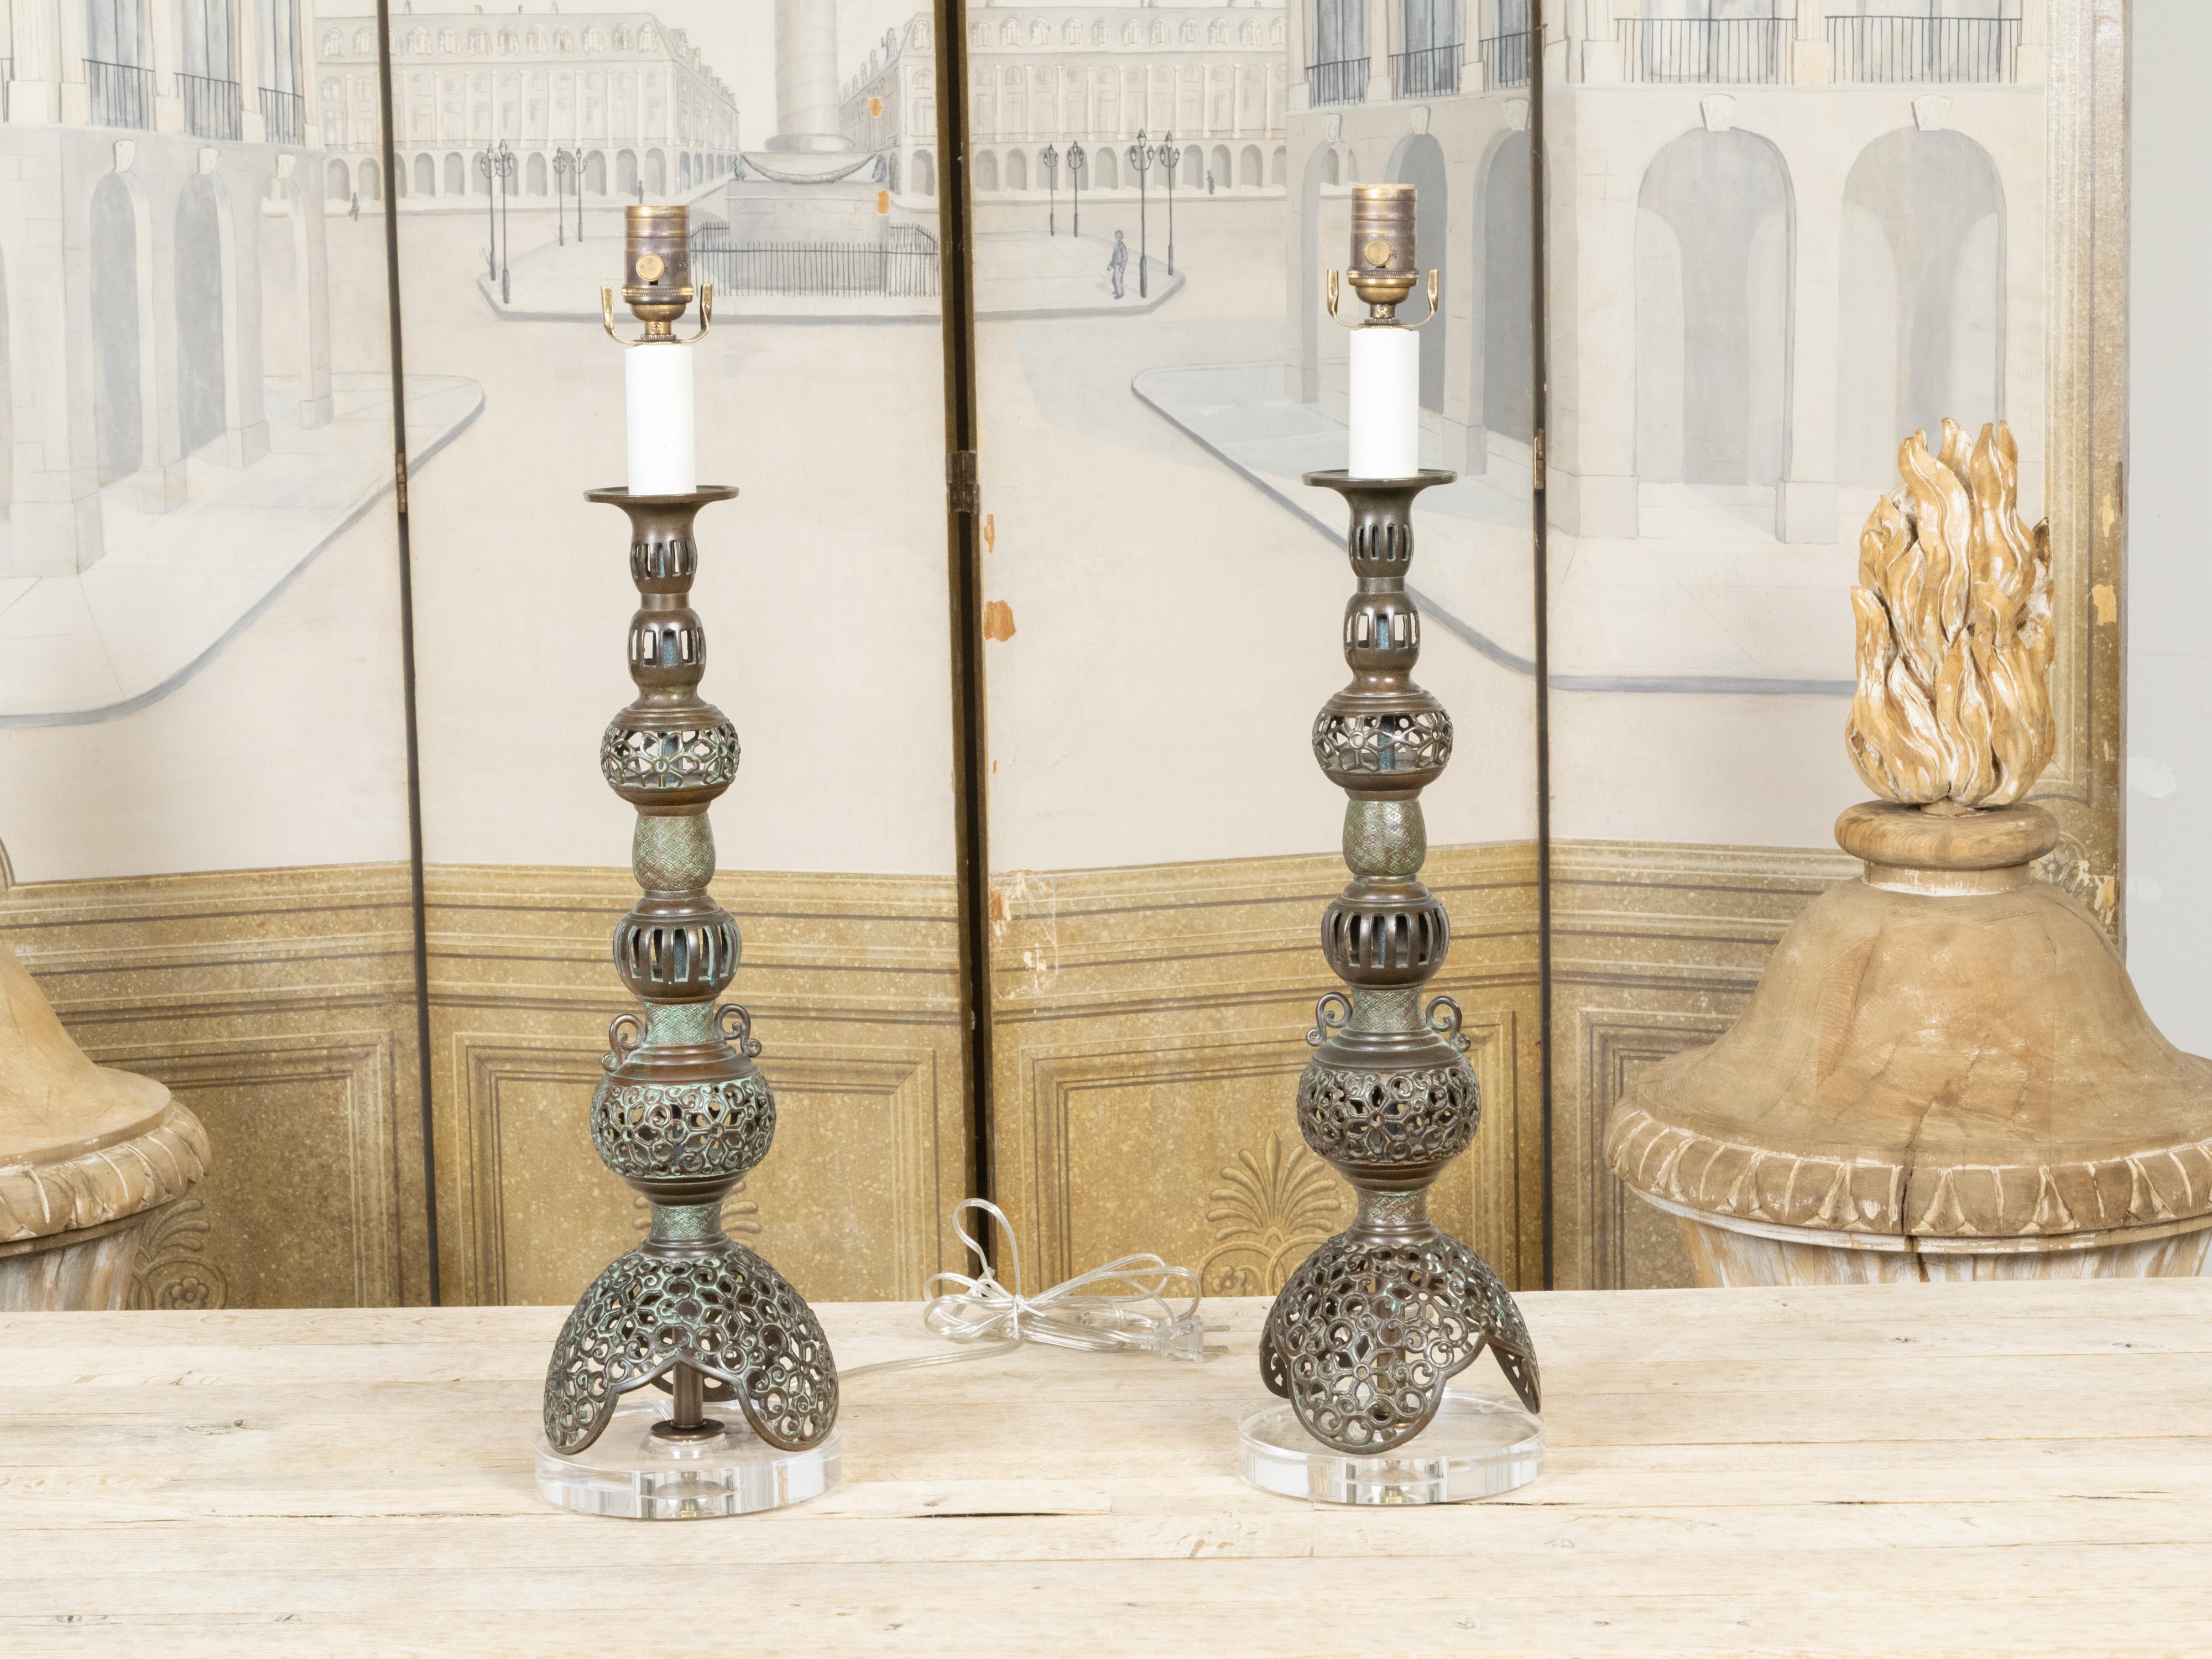 A pair of Asian bronze table lamps from the mid-20th century, with openwork décor, single lights and custom lucite bases, wired for the USA. Created in Asia during the Midcentury period, each of this pair of bronze table lamps features an elegant